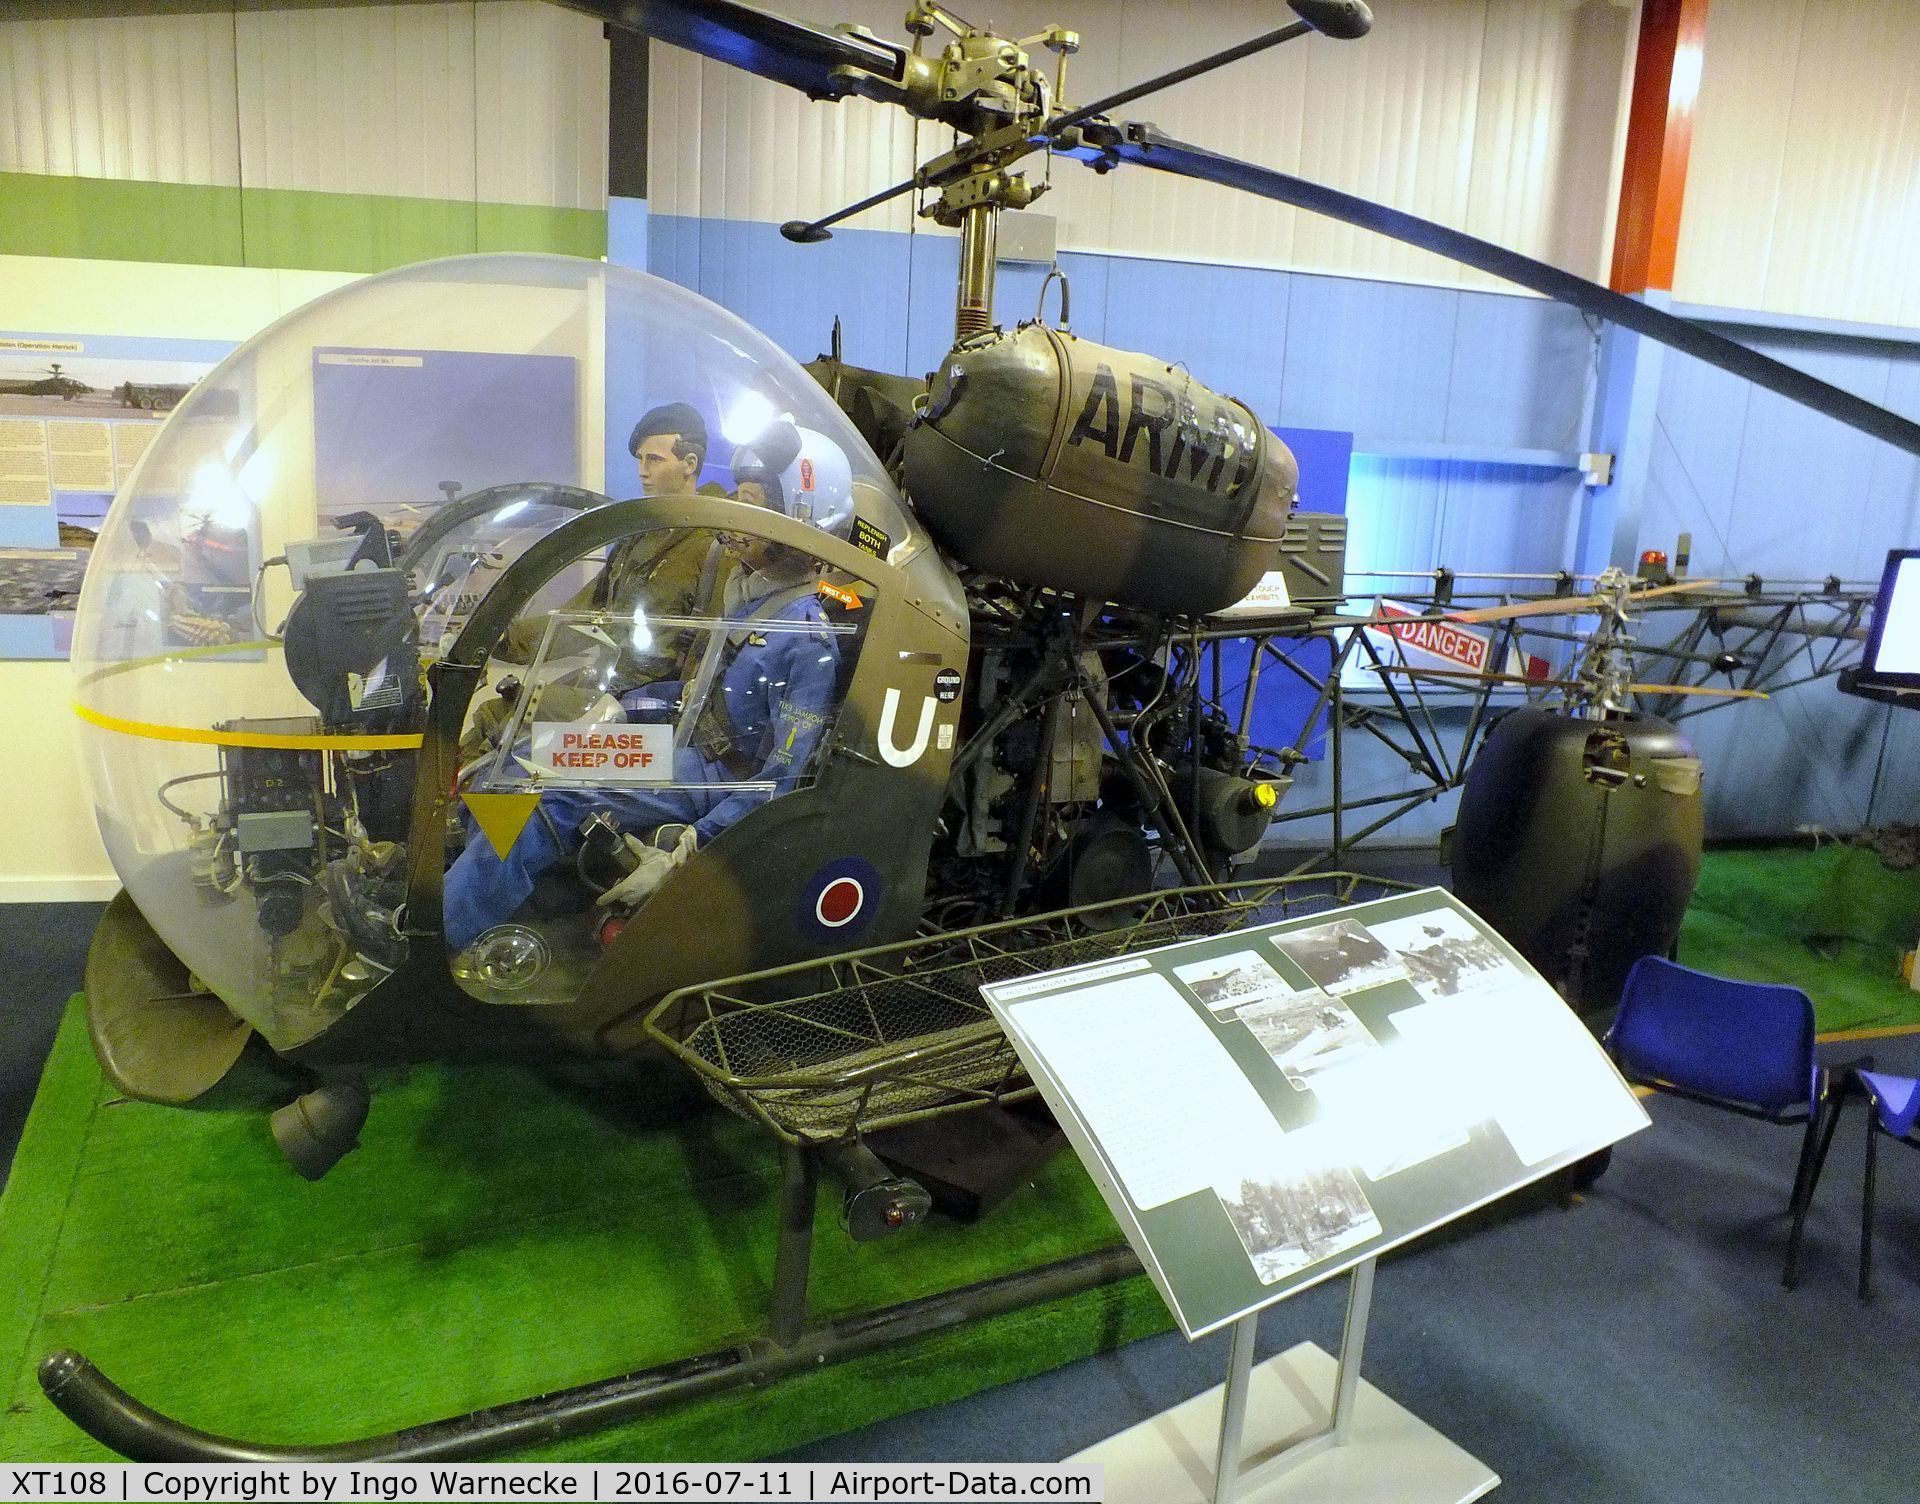 XT108, 1965 Westland Sioux AH.1 C/N 1571, Agusta-Bell (Westland) Sioux AH1 (47G-3B1) at the Museum of Army Flying, Middle Wallop